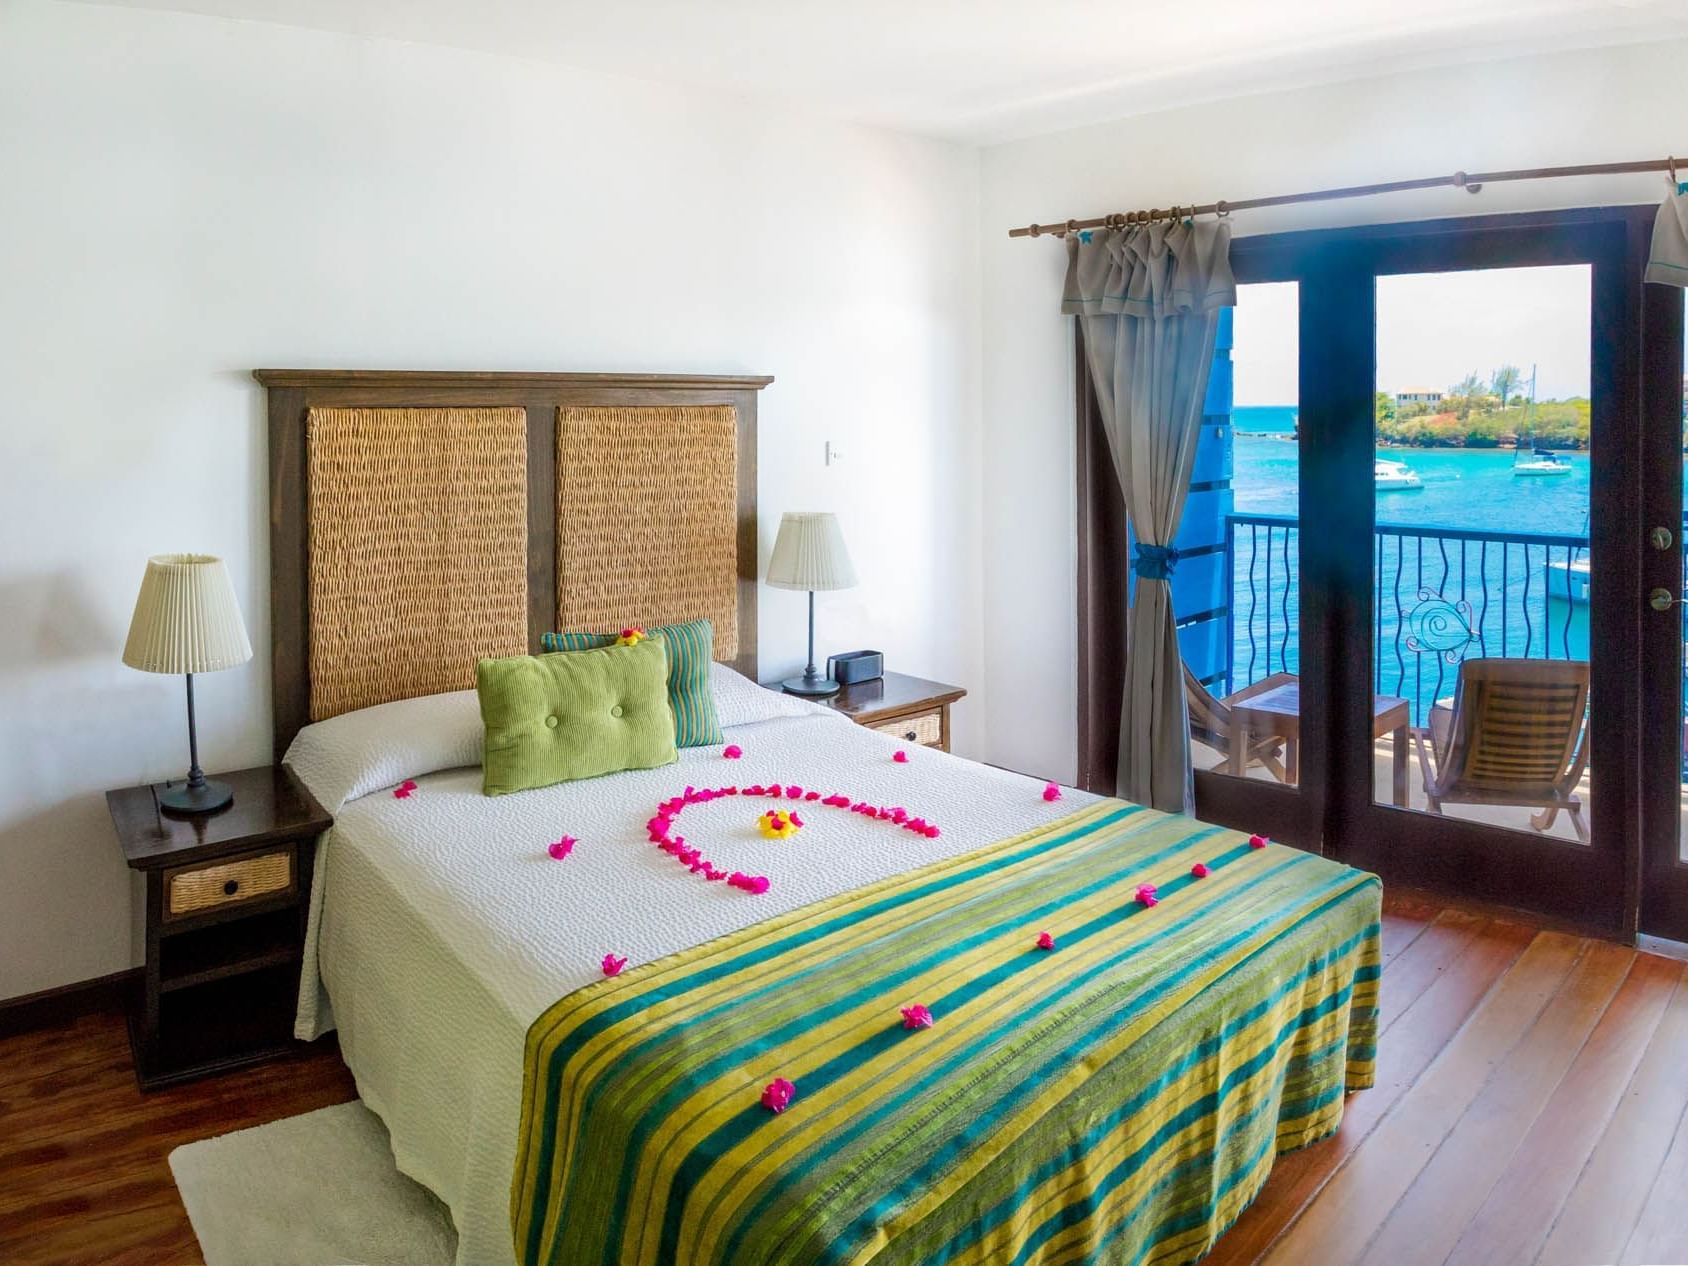 Interior of the Water Front Suites at True Blue Bay Resort